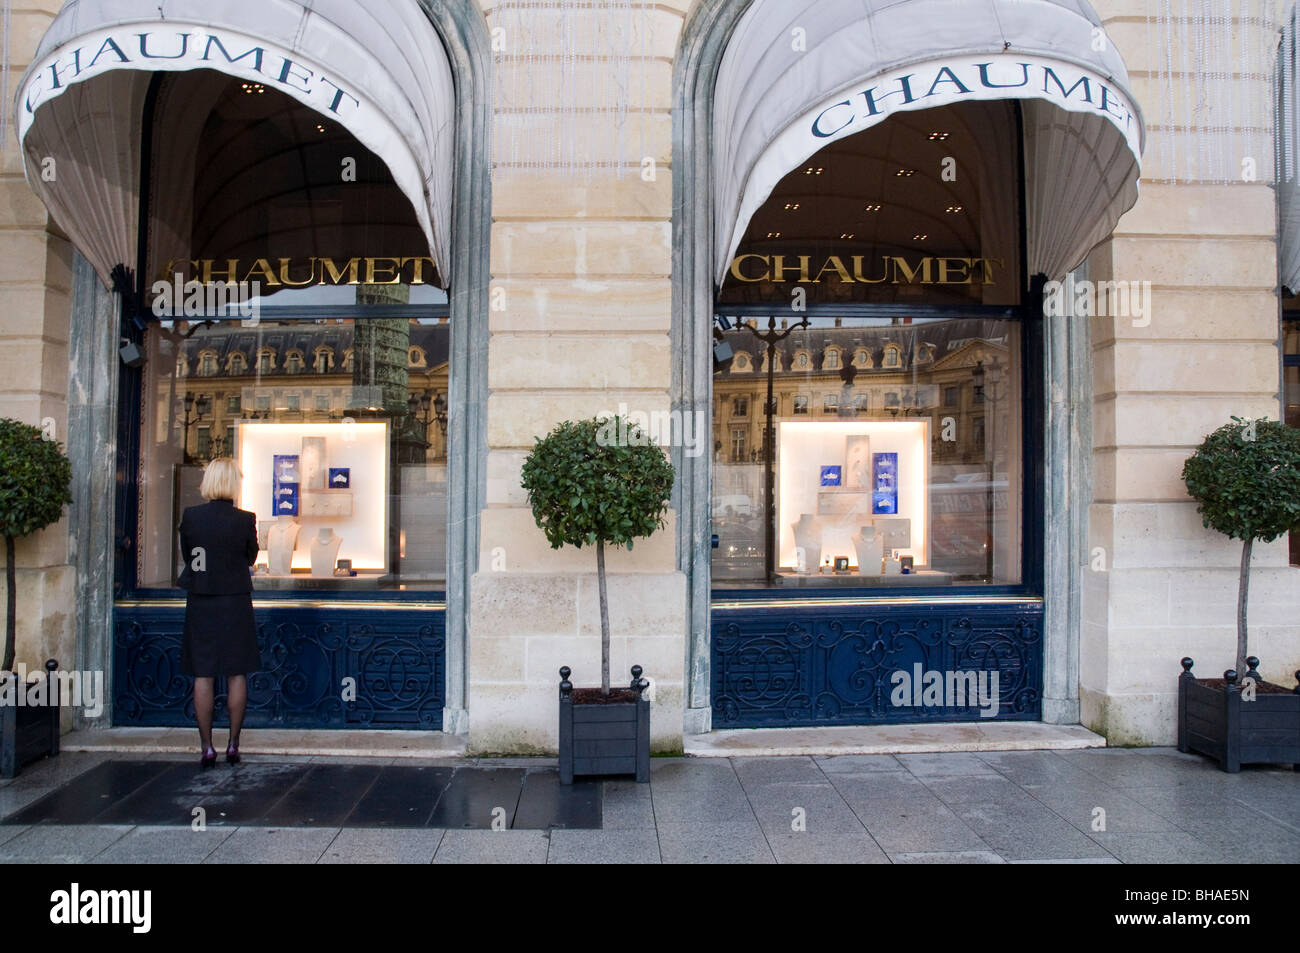 Chaumet, jewelry store, place Vendome in Paris Stock Photo - Alamy